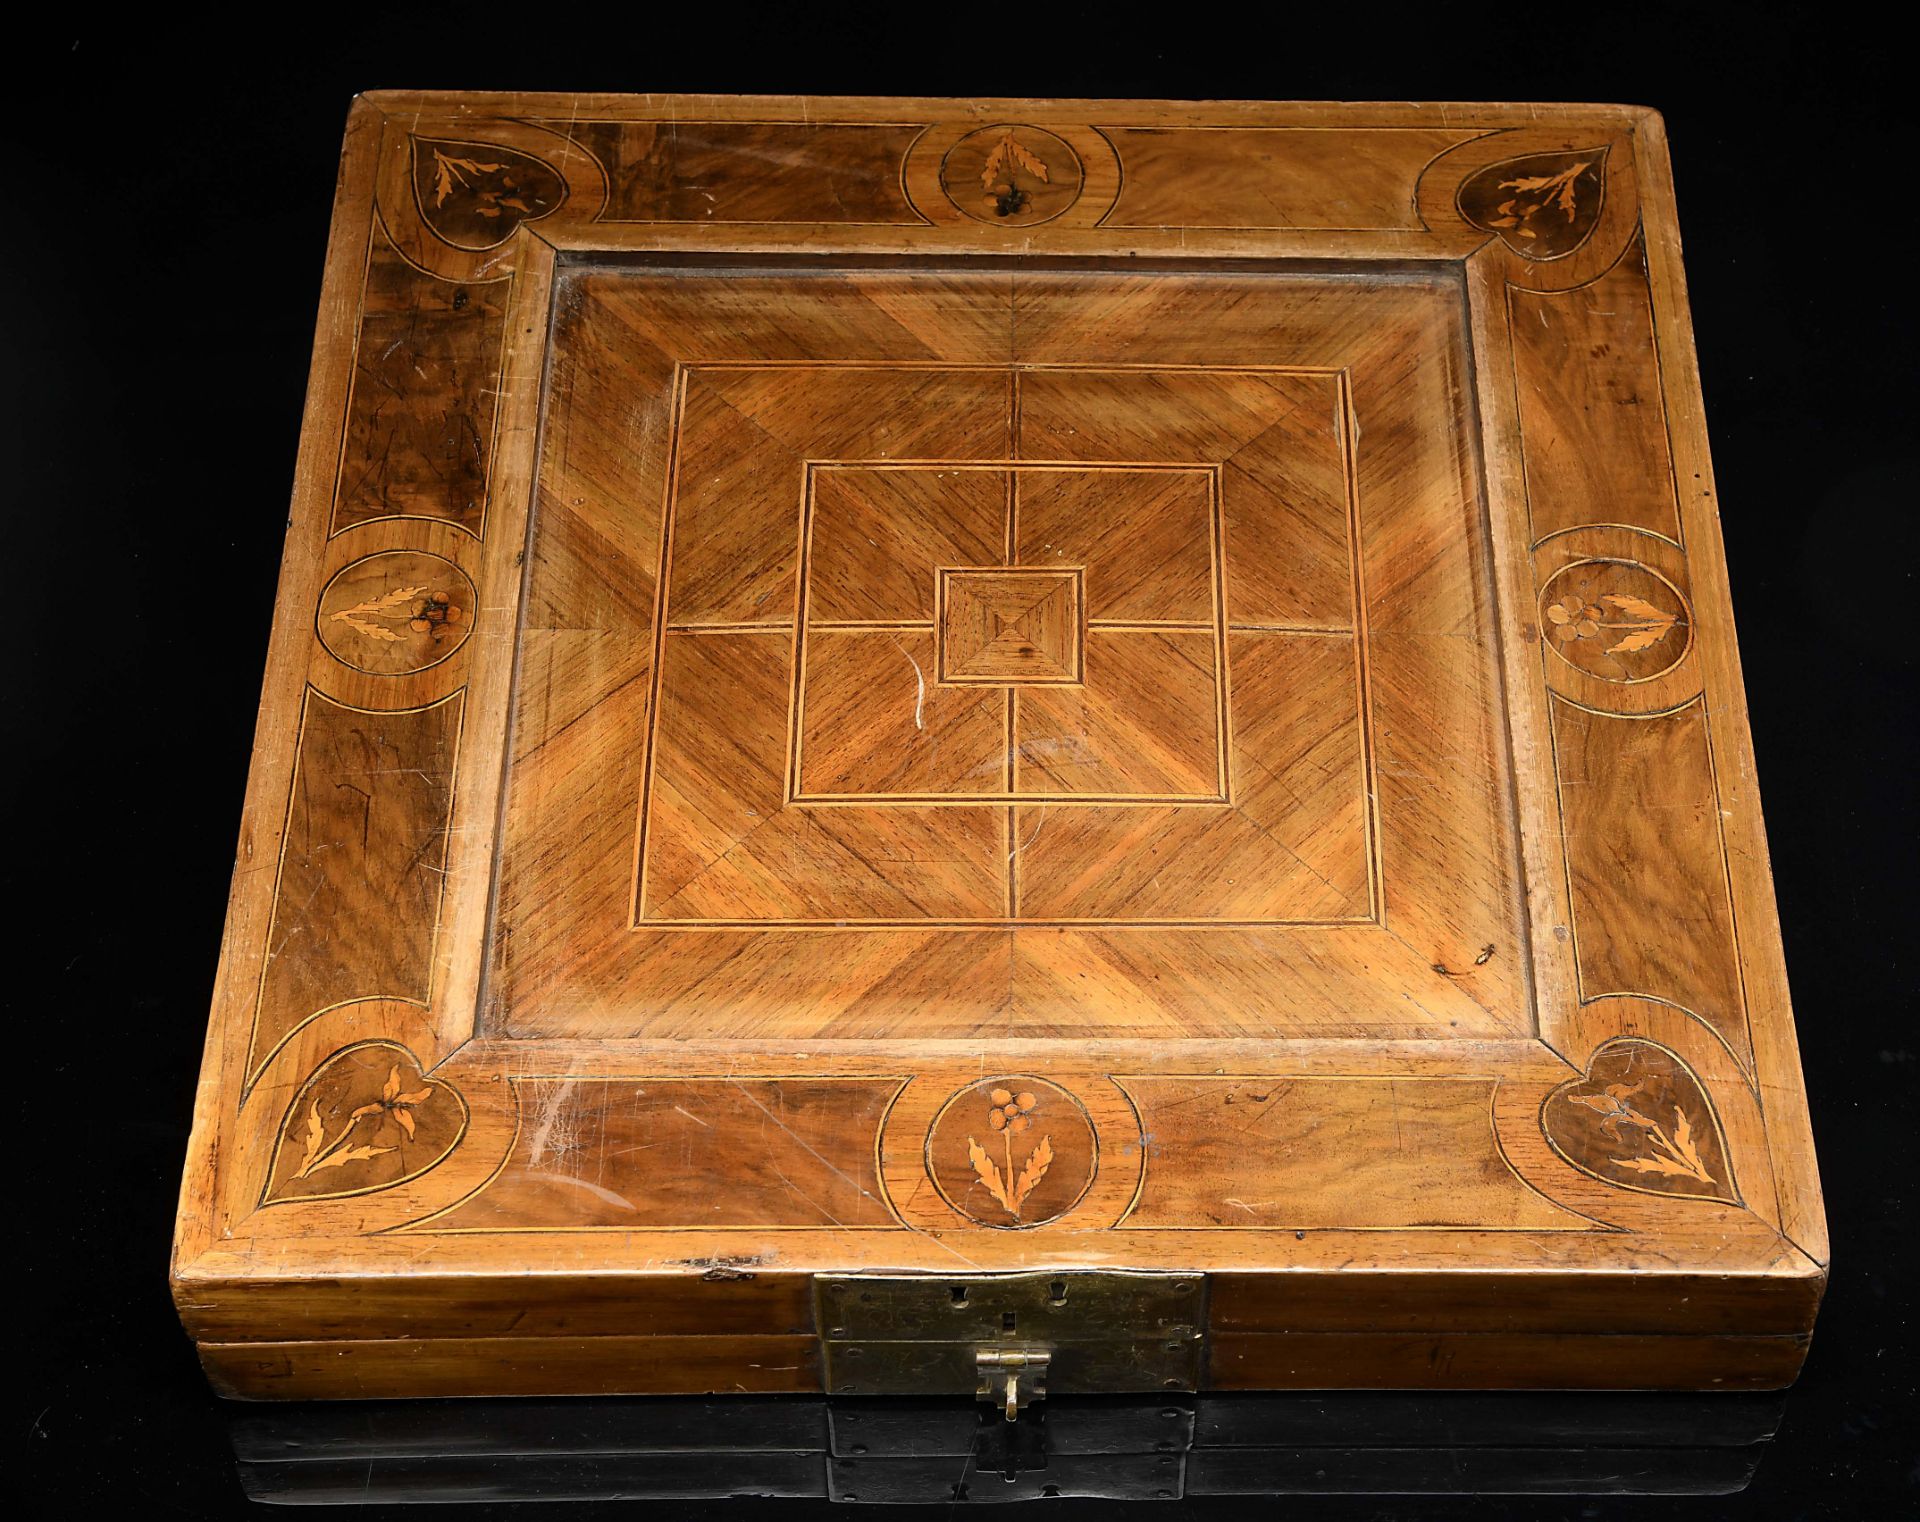 A Hinged Chess, Backgammon and Nine Men’s Morris boards (Mill game) closing in the shape of a box - Image 7 of 8